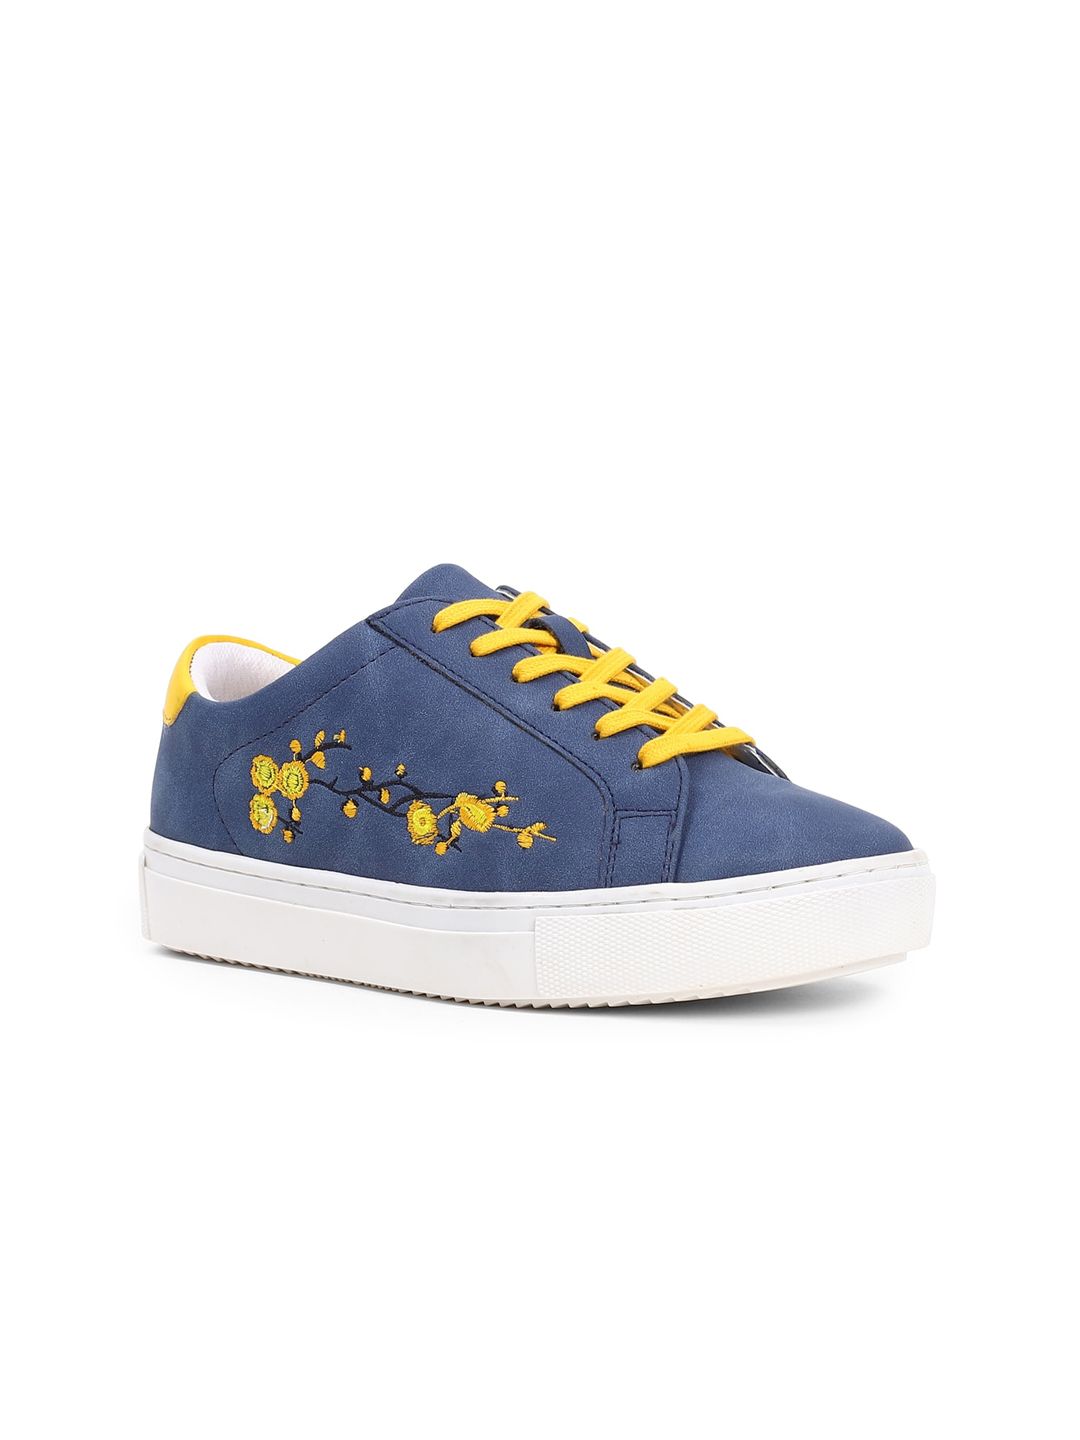 FOREVER 21 Women Blue & Yellow Floral Woven Design Everyday Sneakers Price in India